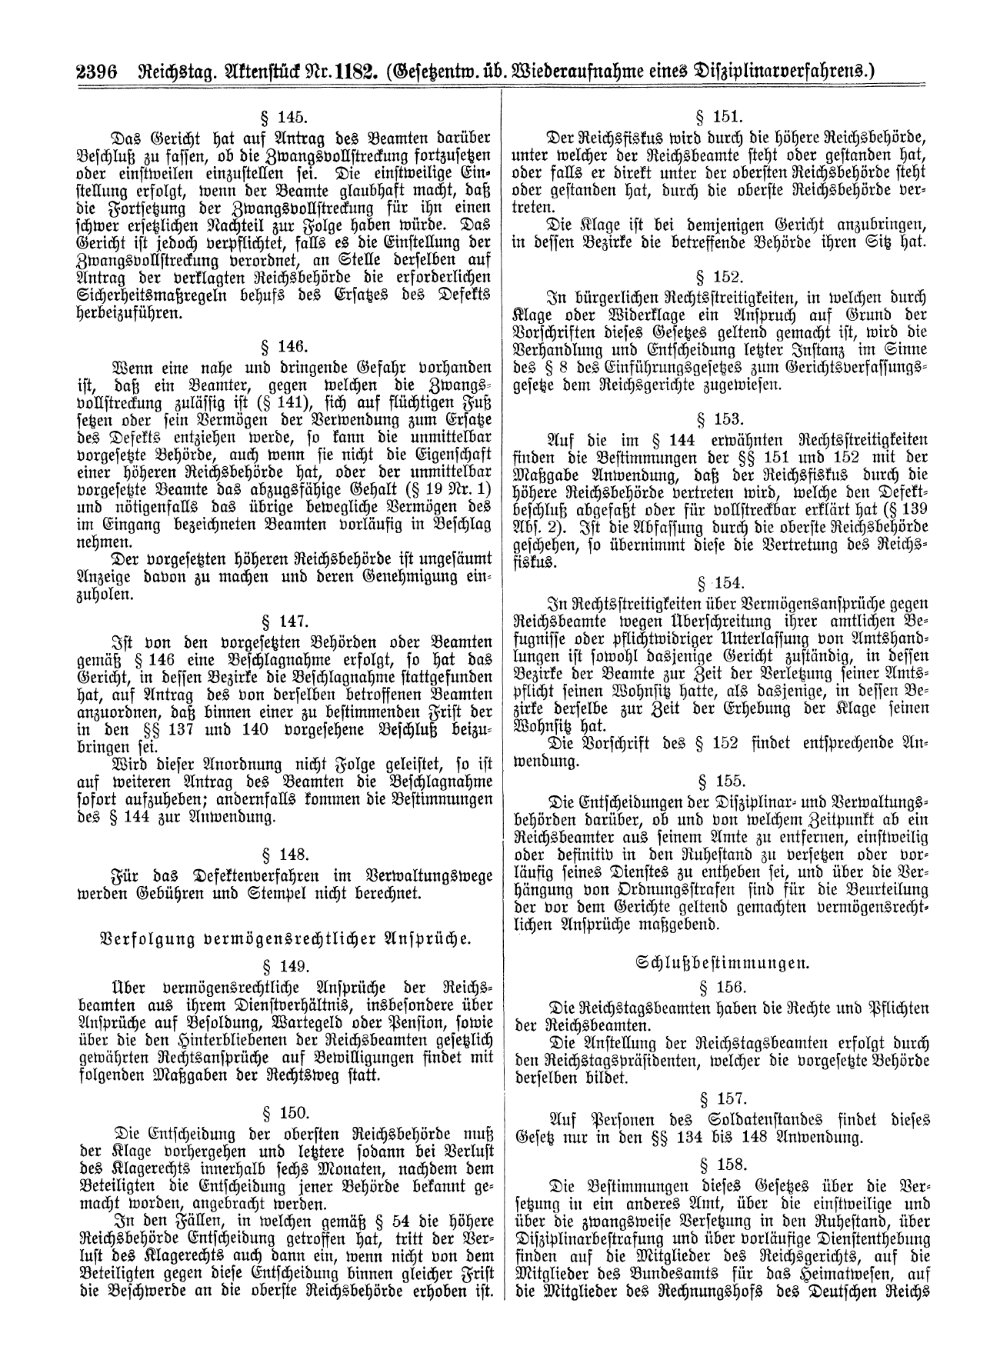 Scan of page 2396